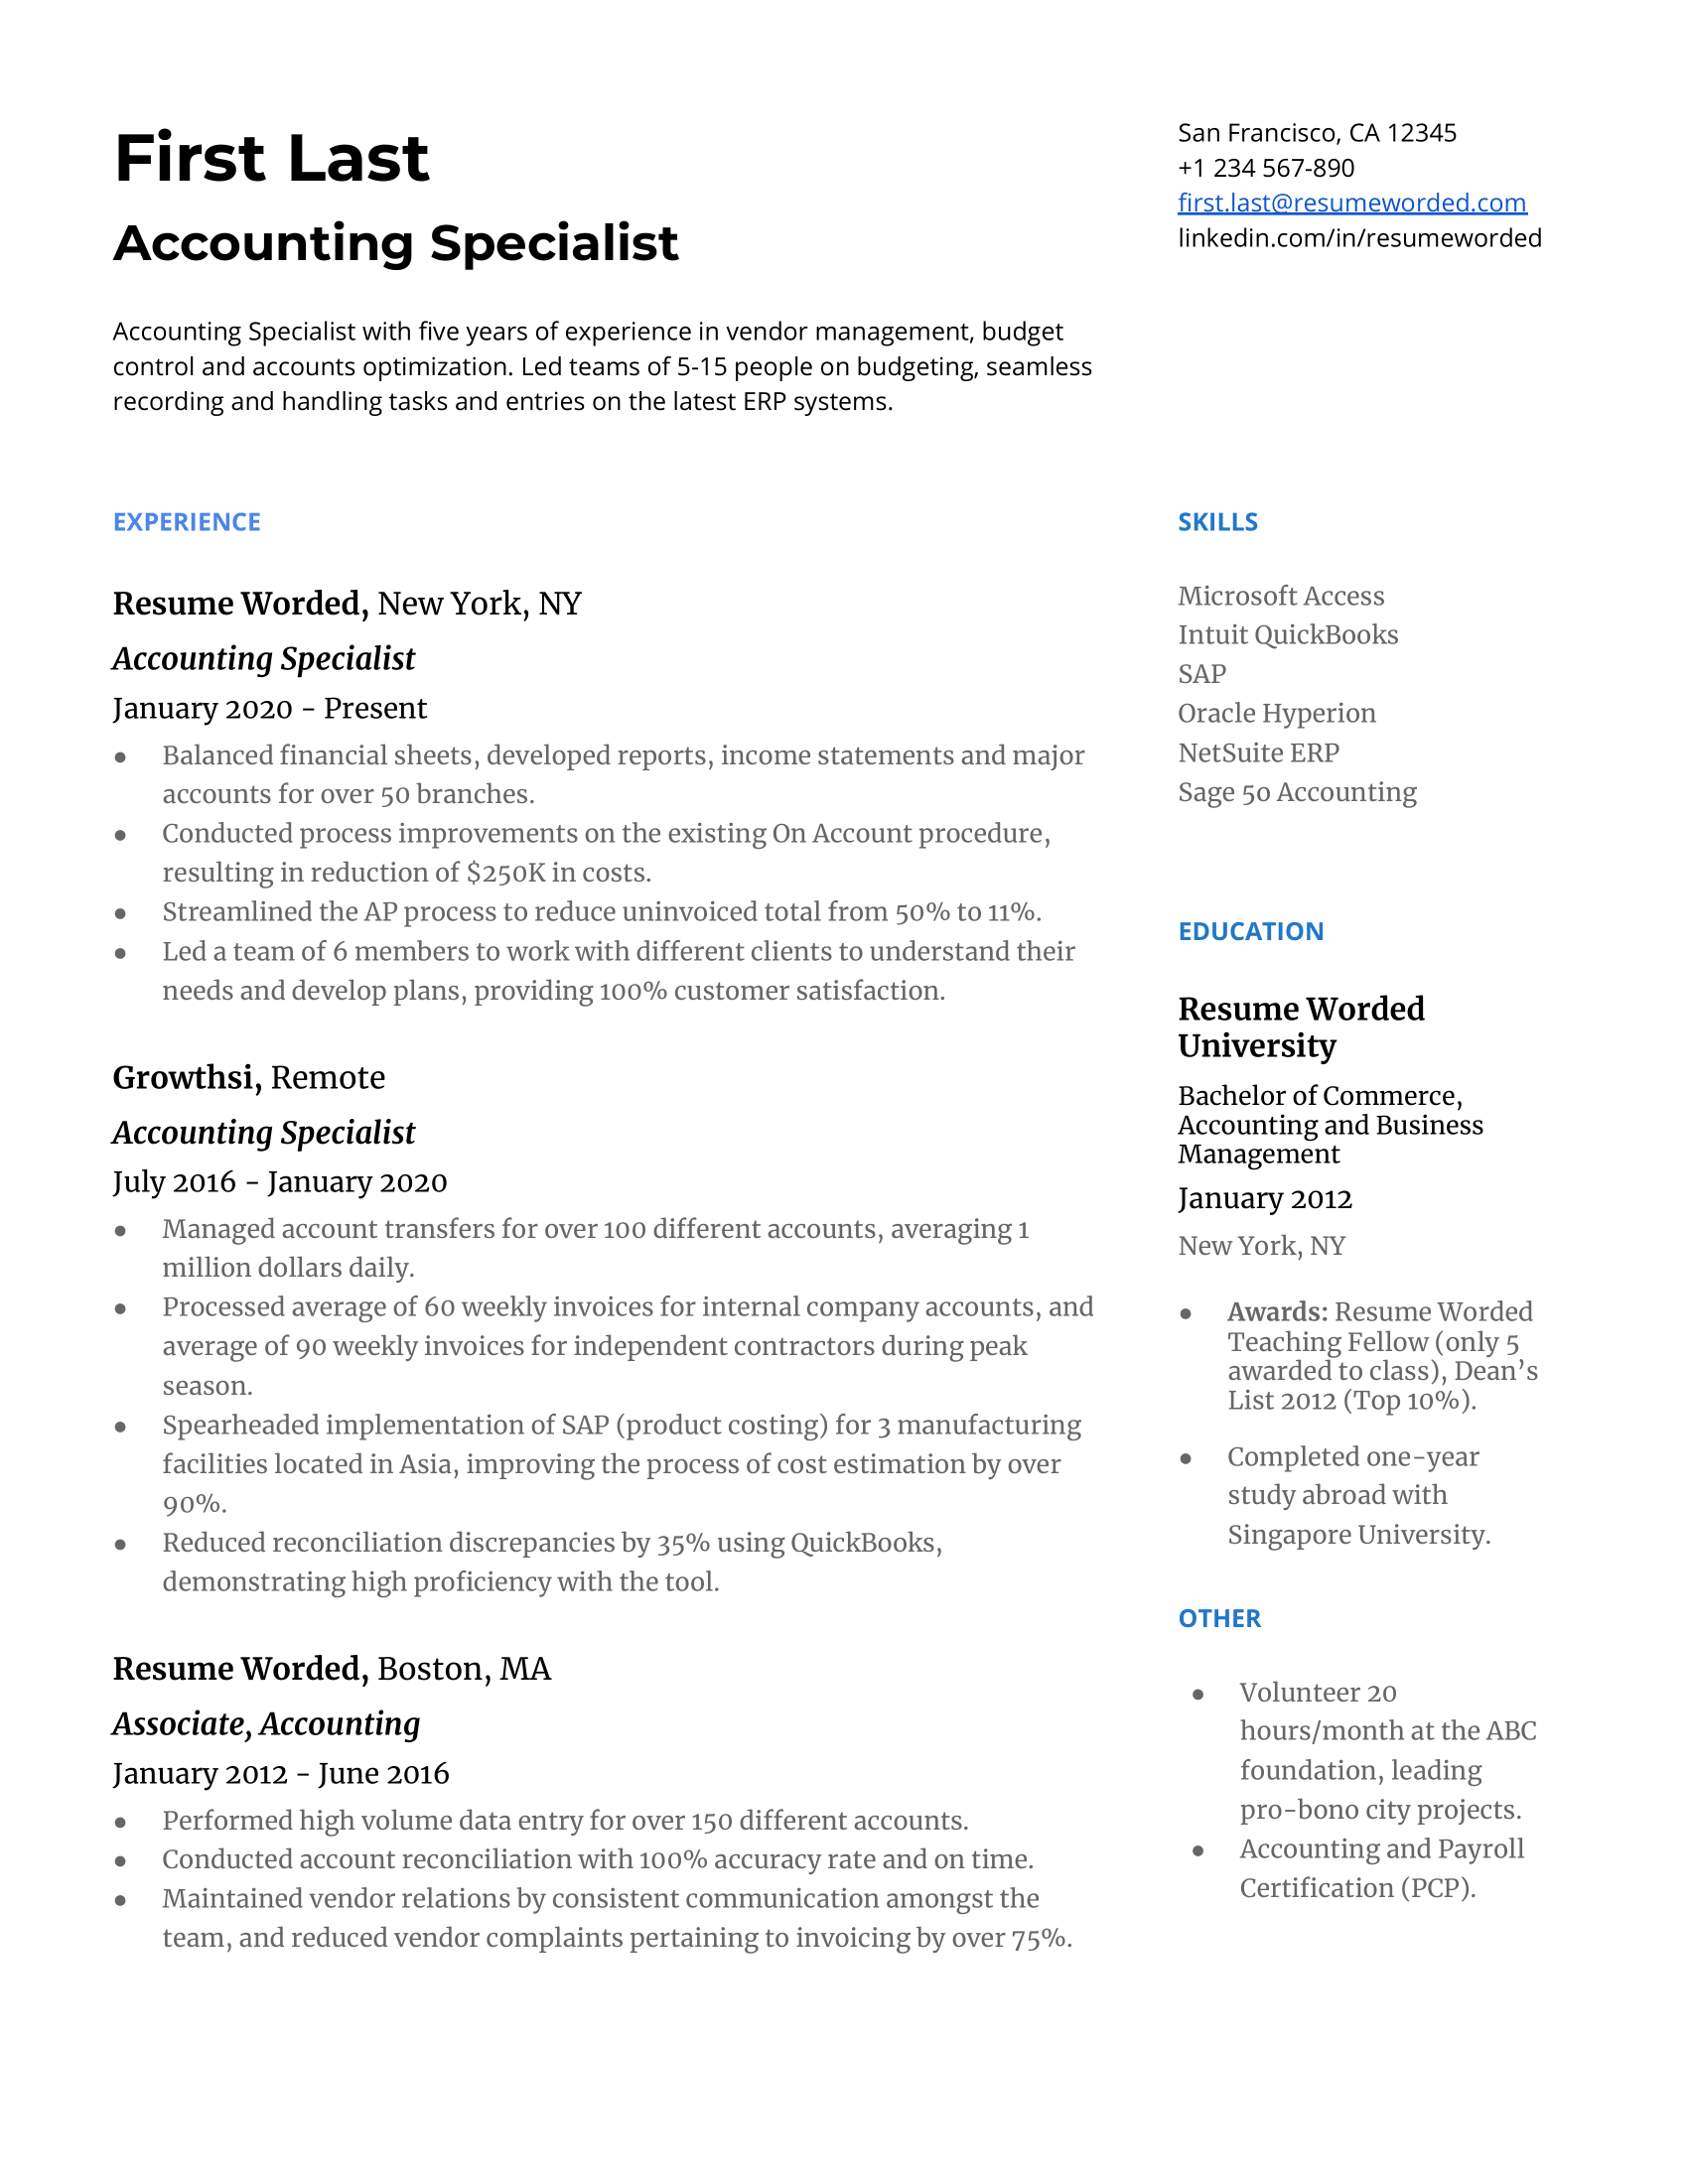 Accounting Specialist Resume Template + Example